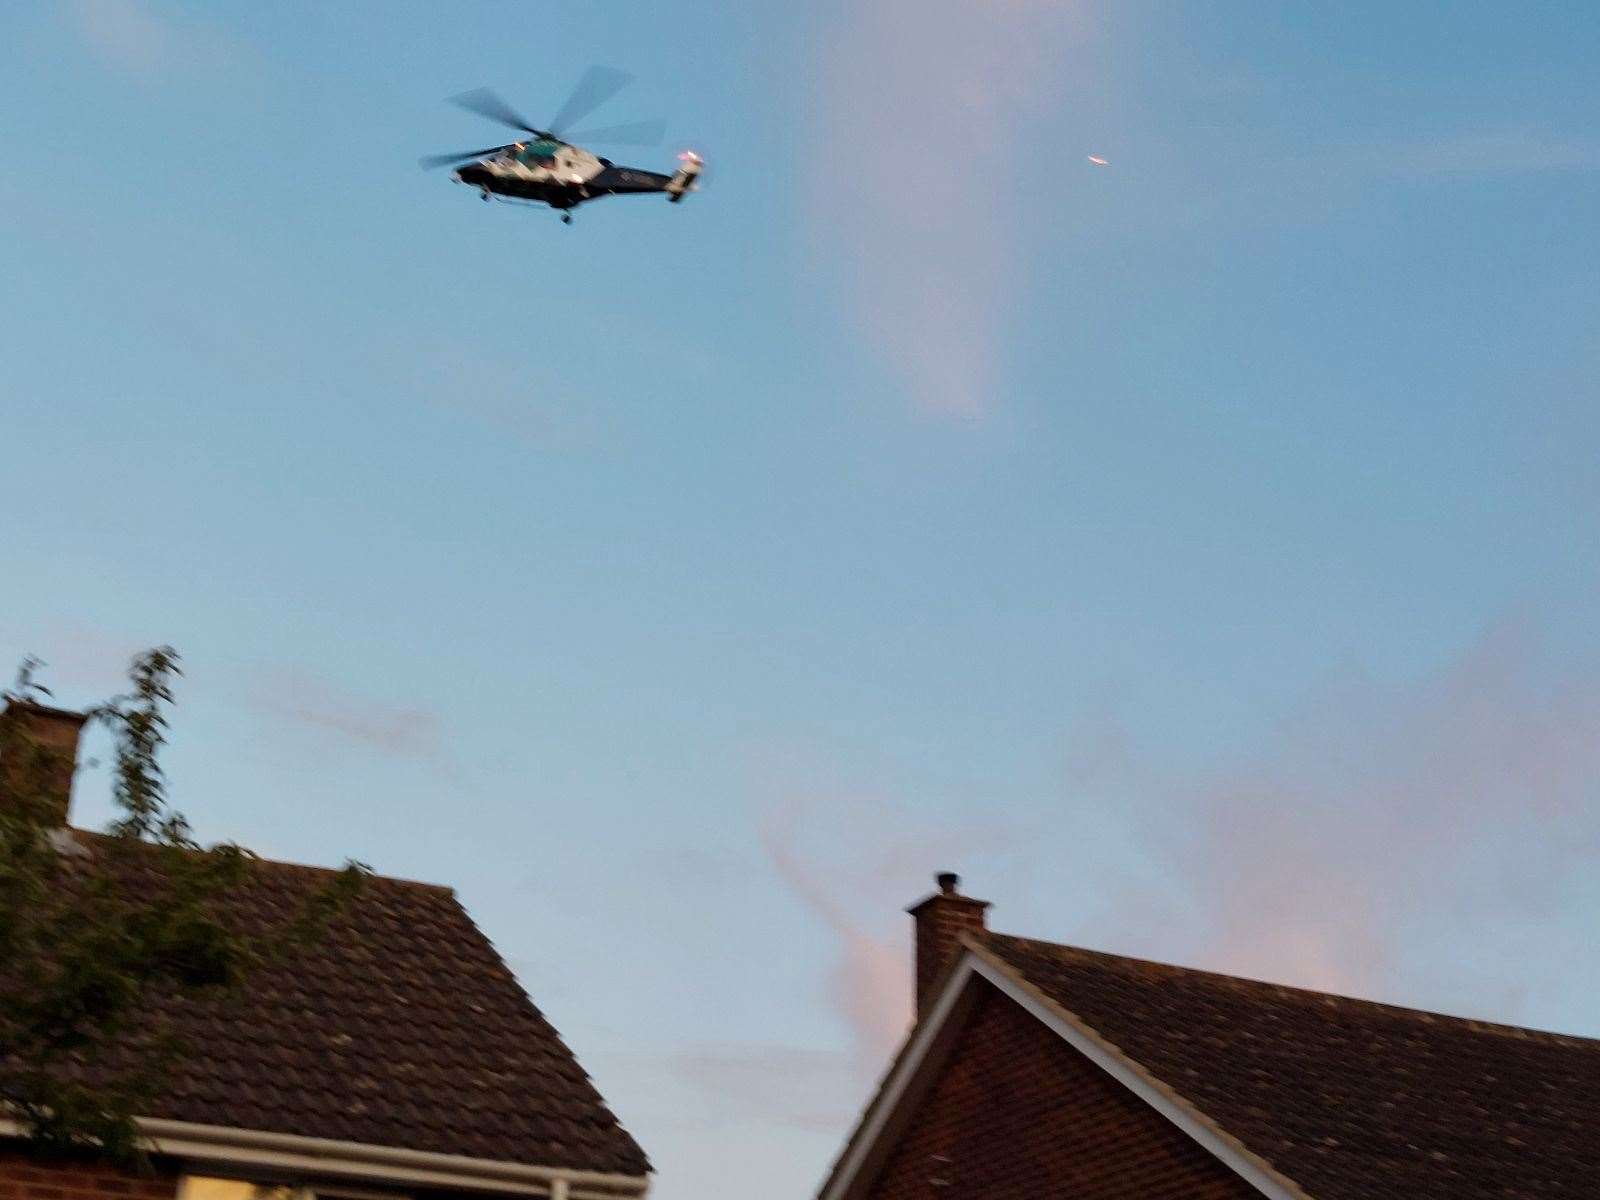 The air ambulance was seen taking off from behind houses in Beaconsfield Road, Canterbury